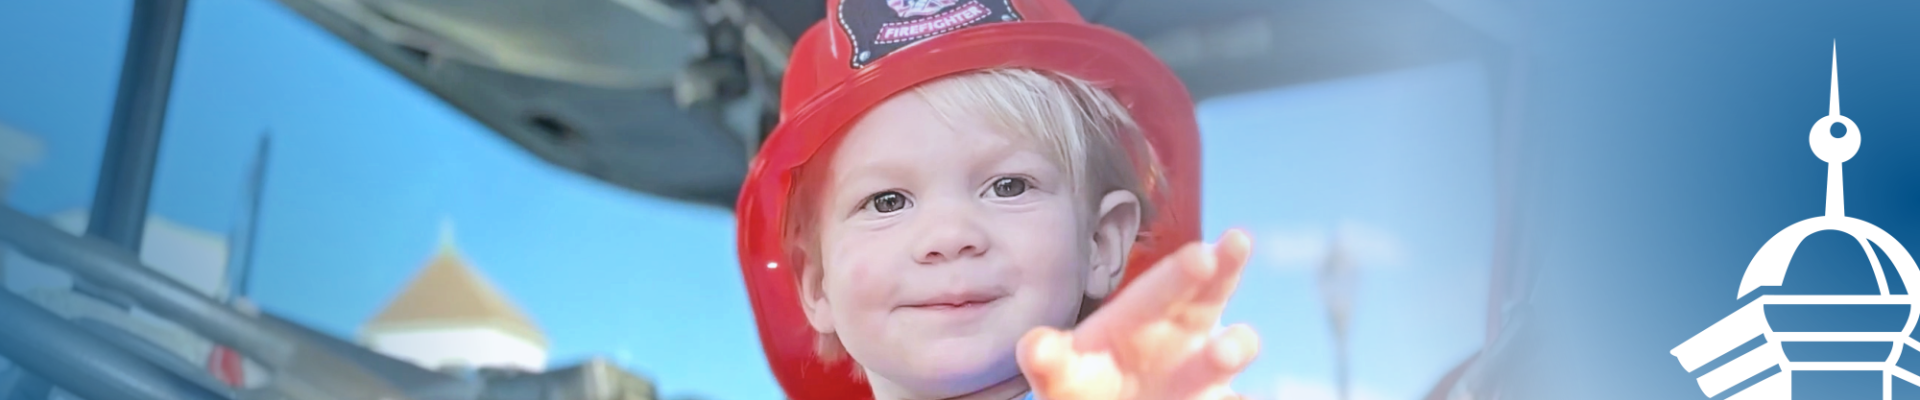 Young child wearing firefighter-style hat in a snippet from the cover of VLCT's 2022 annual report